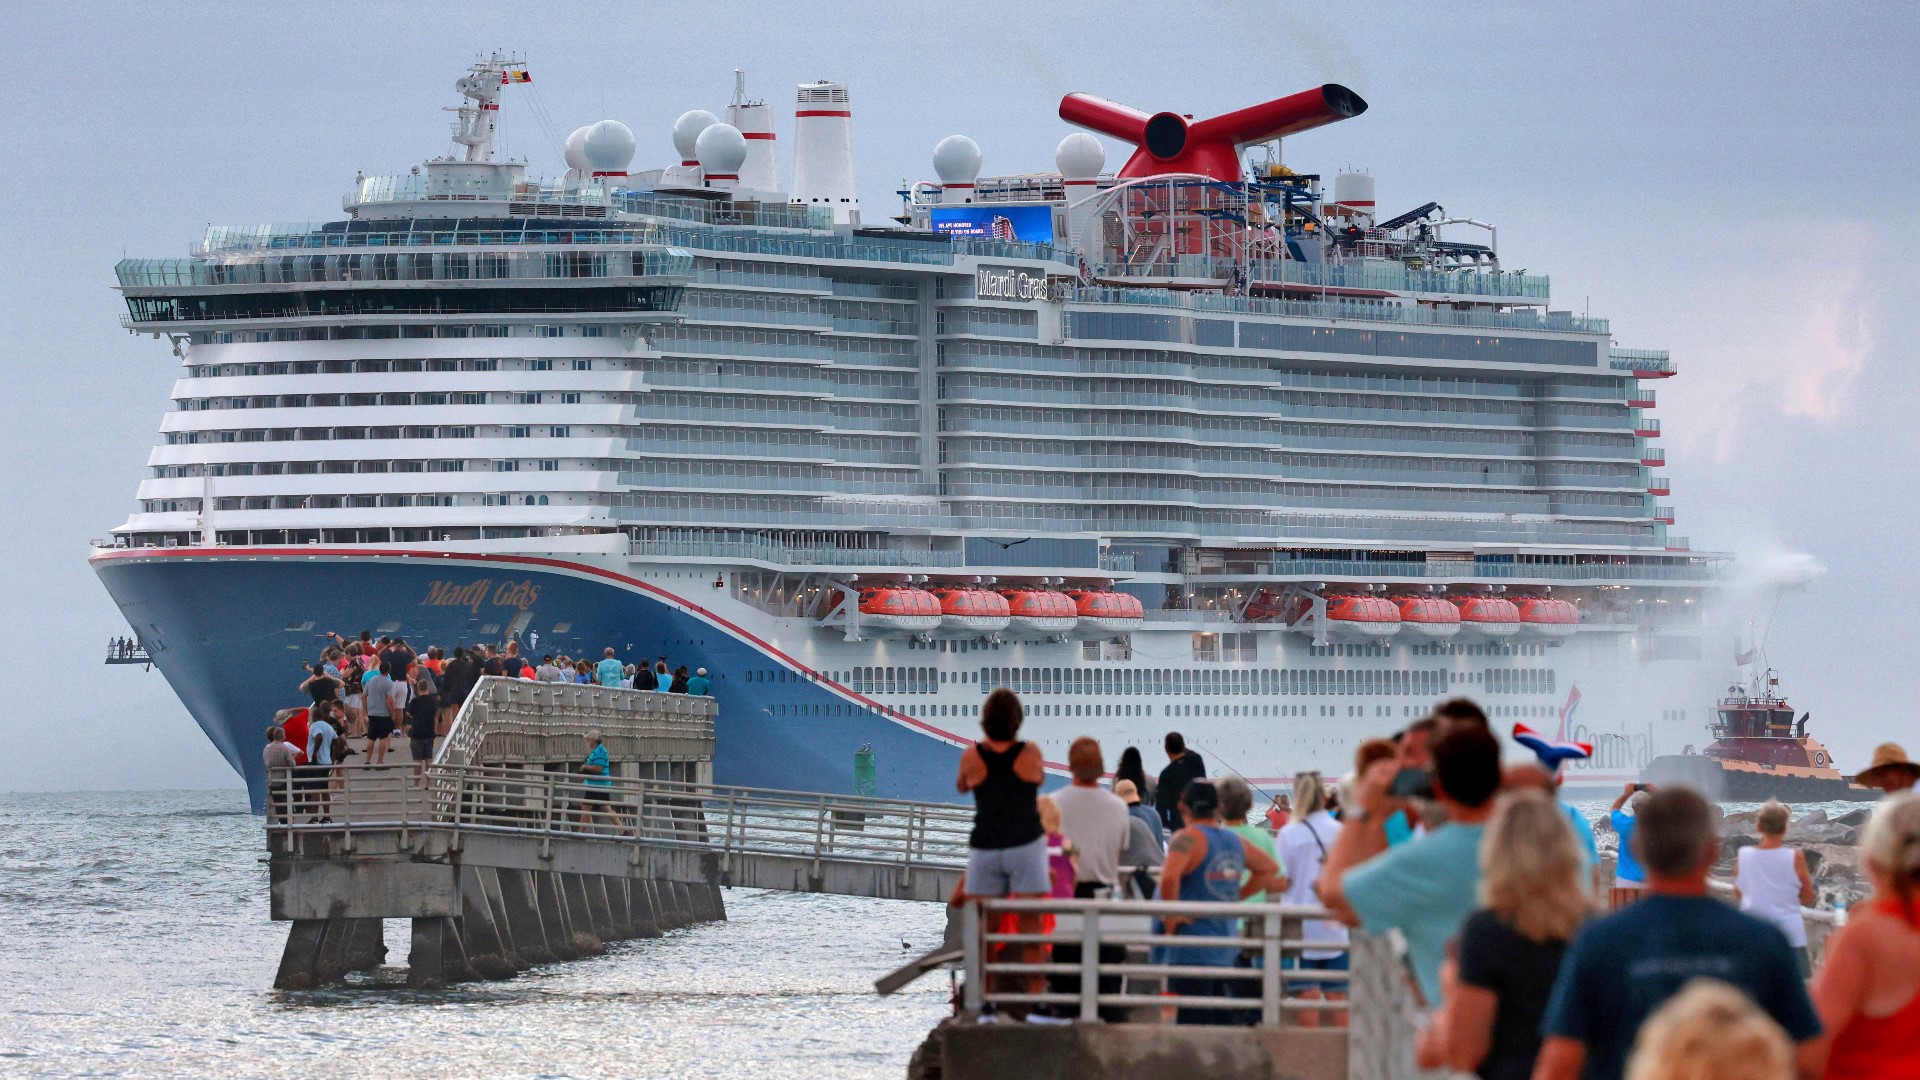 Coast Guard suspends search for man who jumped off cruise ship